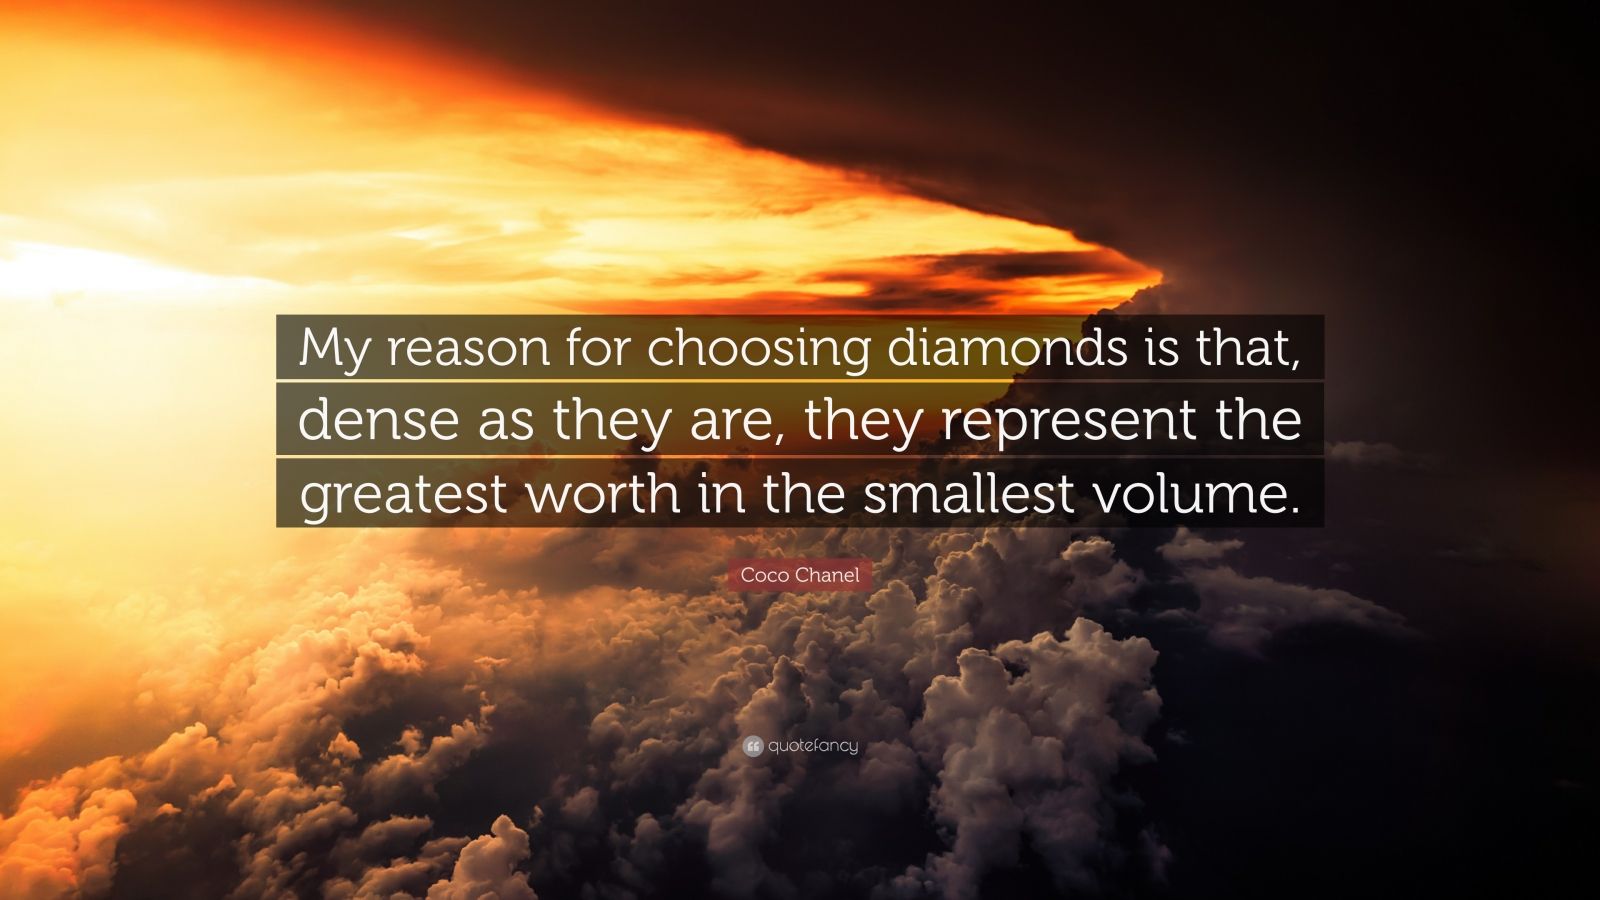 Coco Chanel Quote: “My reason for choosing diamonds is that, dense